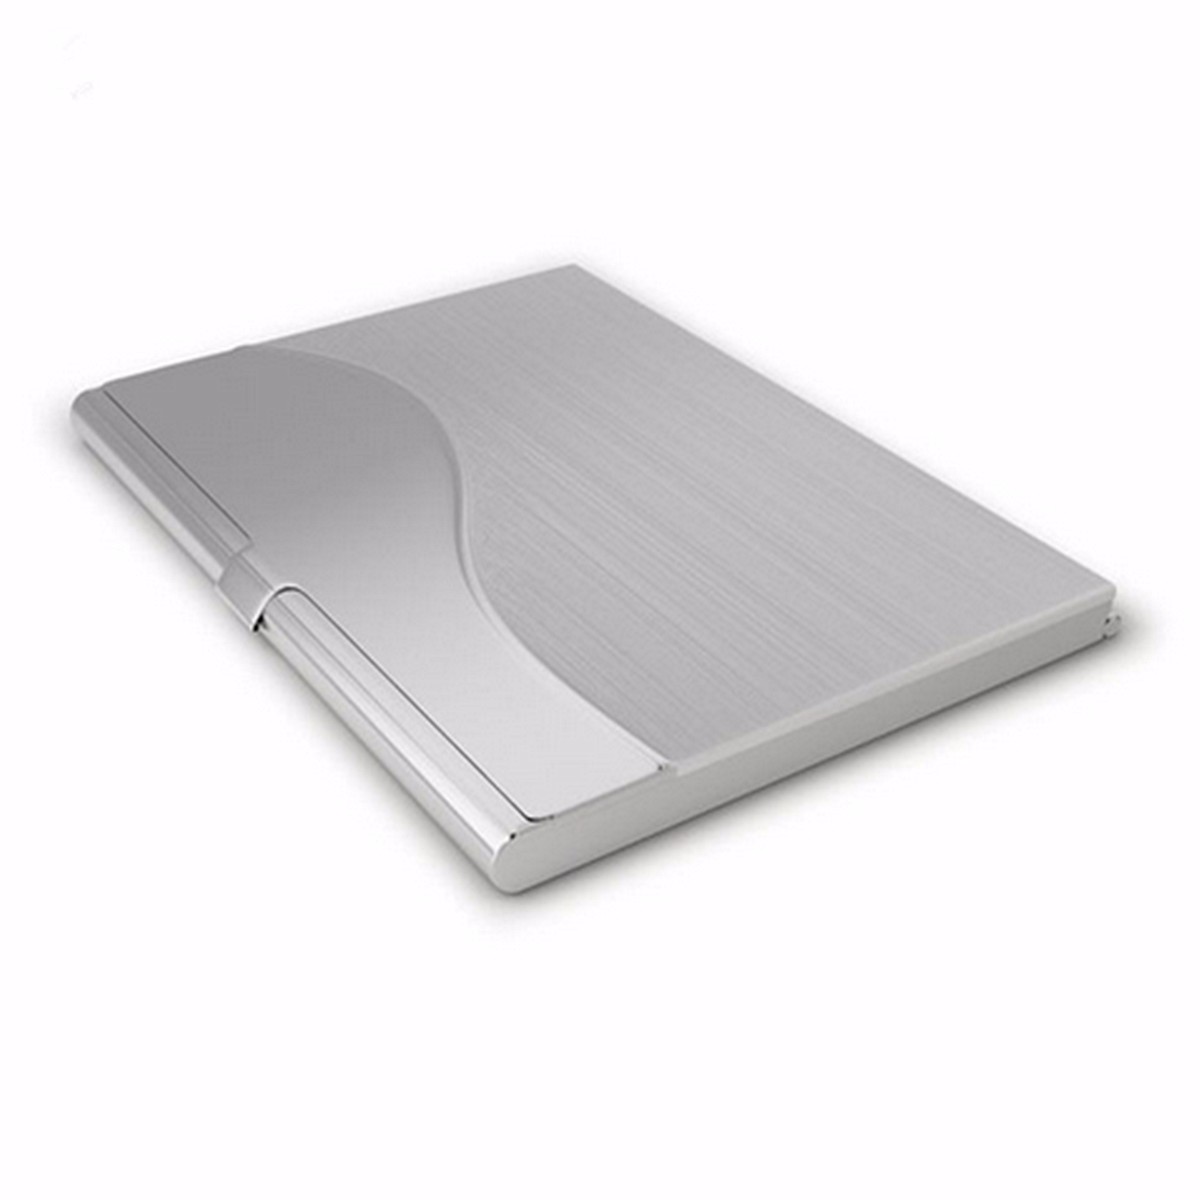 Details about  / Stainless Steel Silver Metal Business Card ID Credit Holder Case Wallet Durable